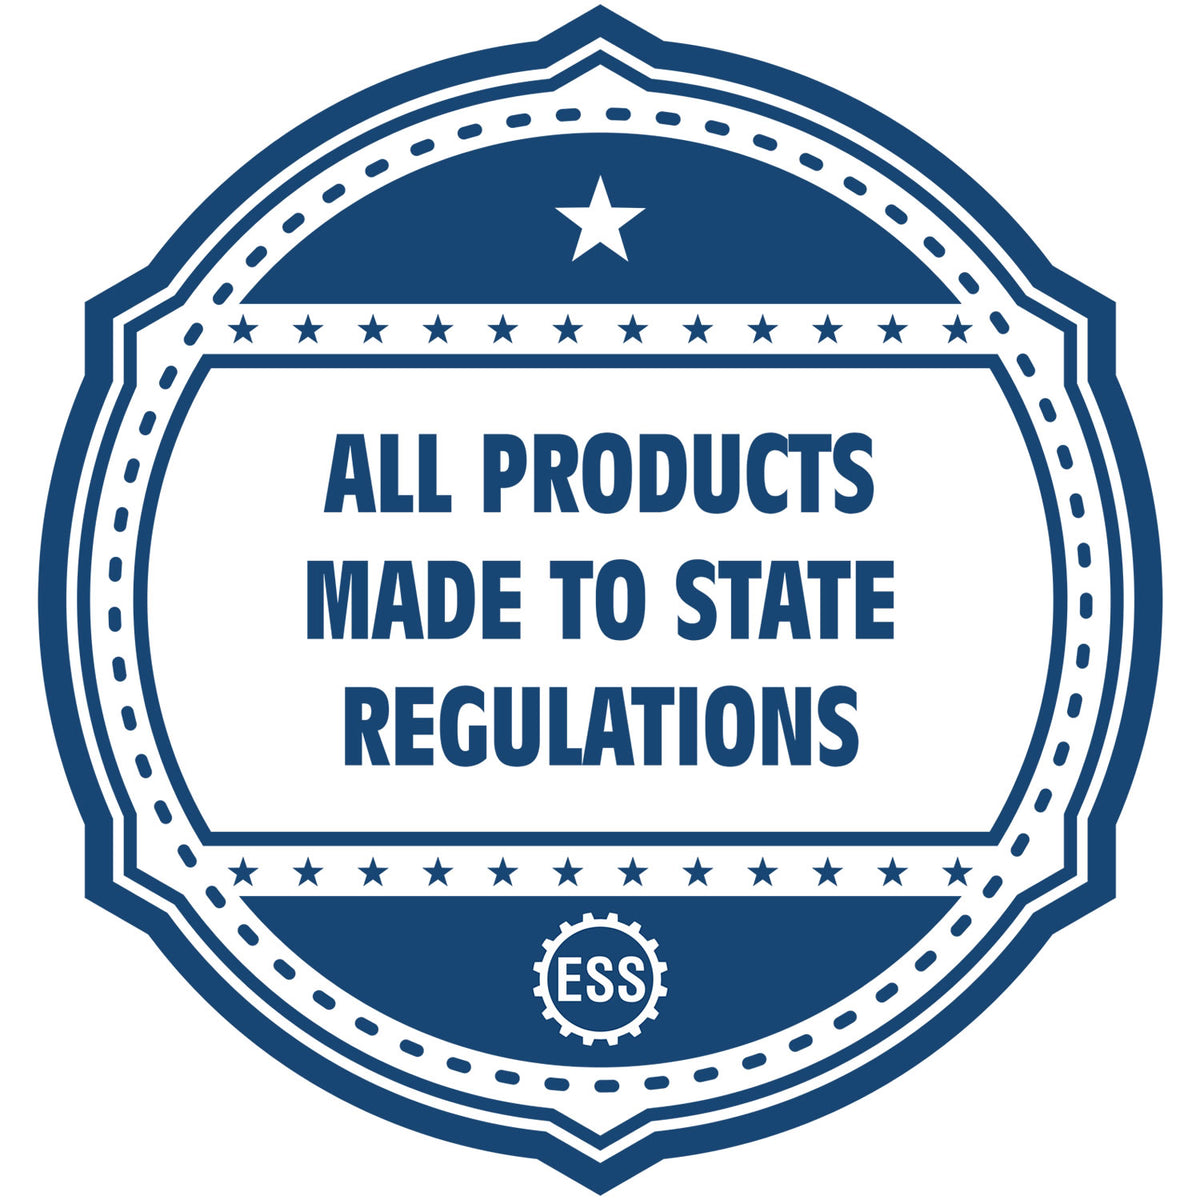 An icon or badge element for the Slim Pre-Inked Florida Land Surveyor Seal Stamp showing that this product is made in compliance with state regulations.